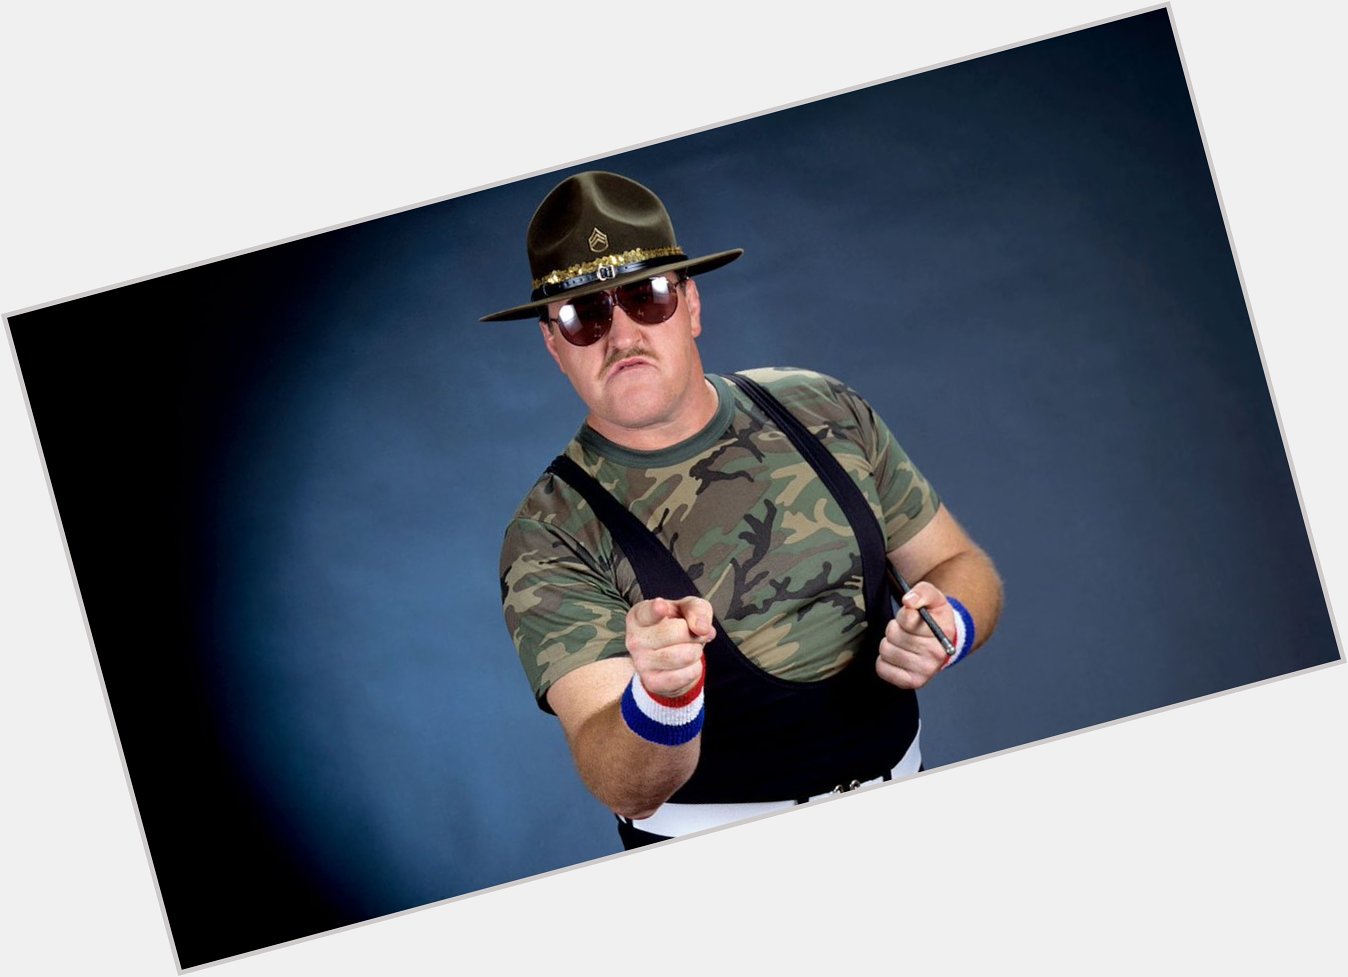 Happy Birthday to Wrestling and GI Joe Superstar Sgt Slaughter! 